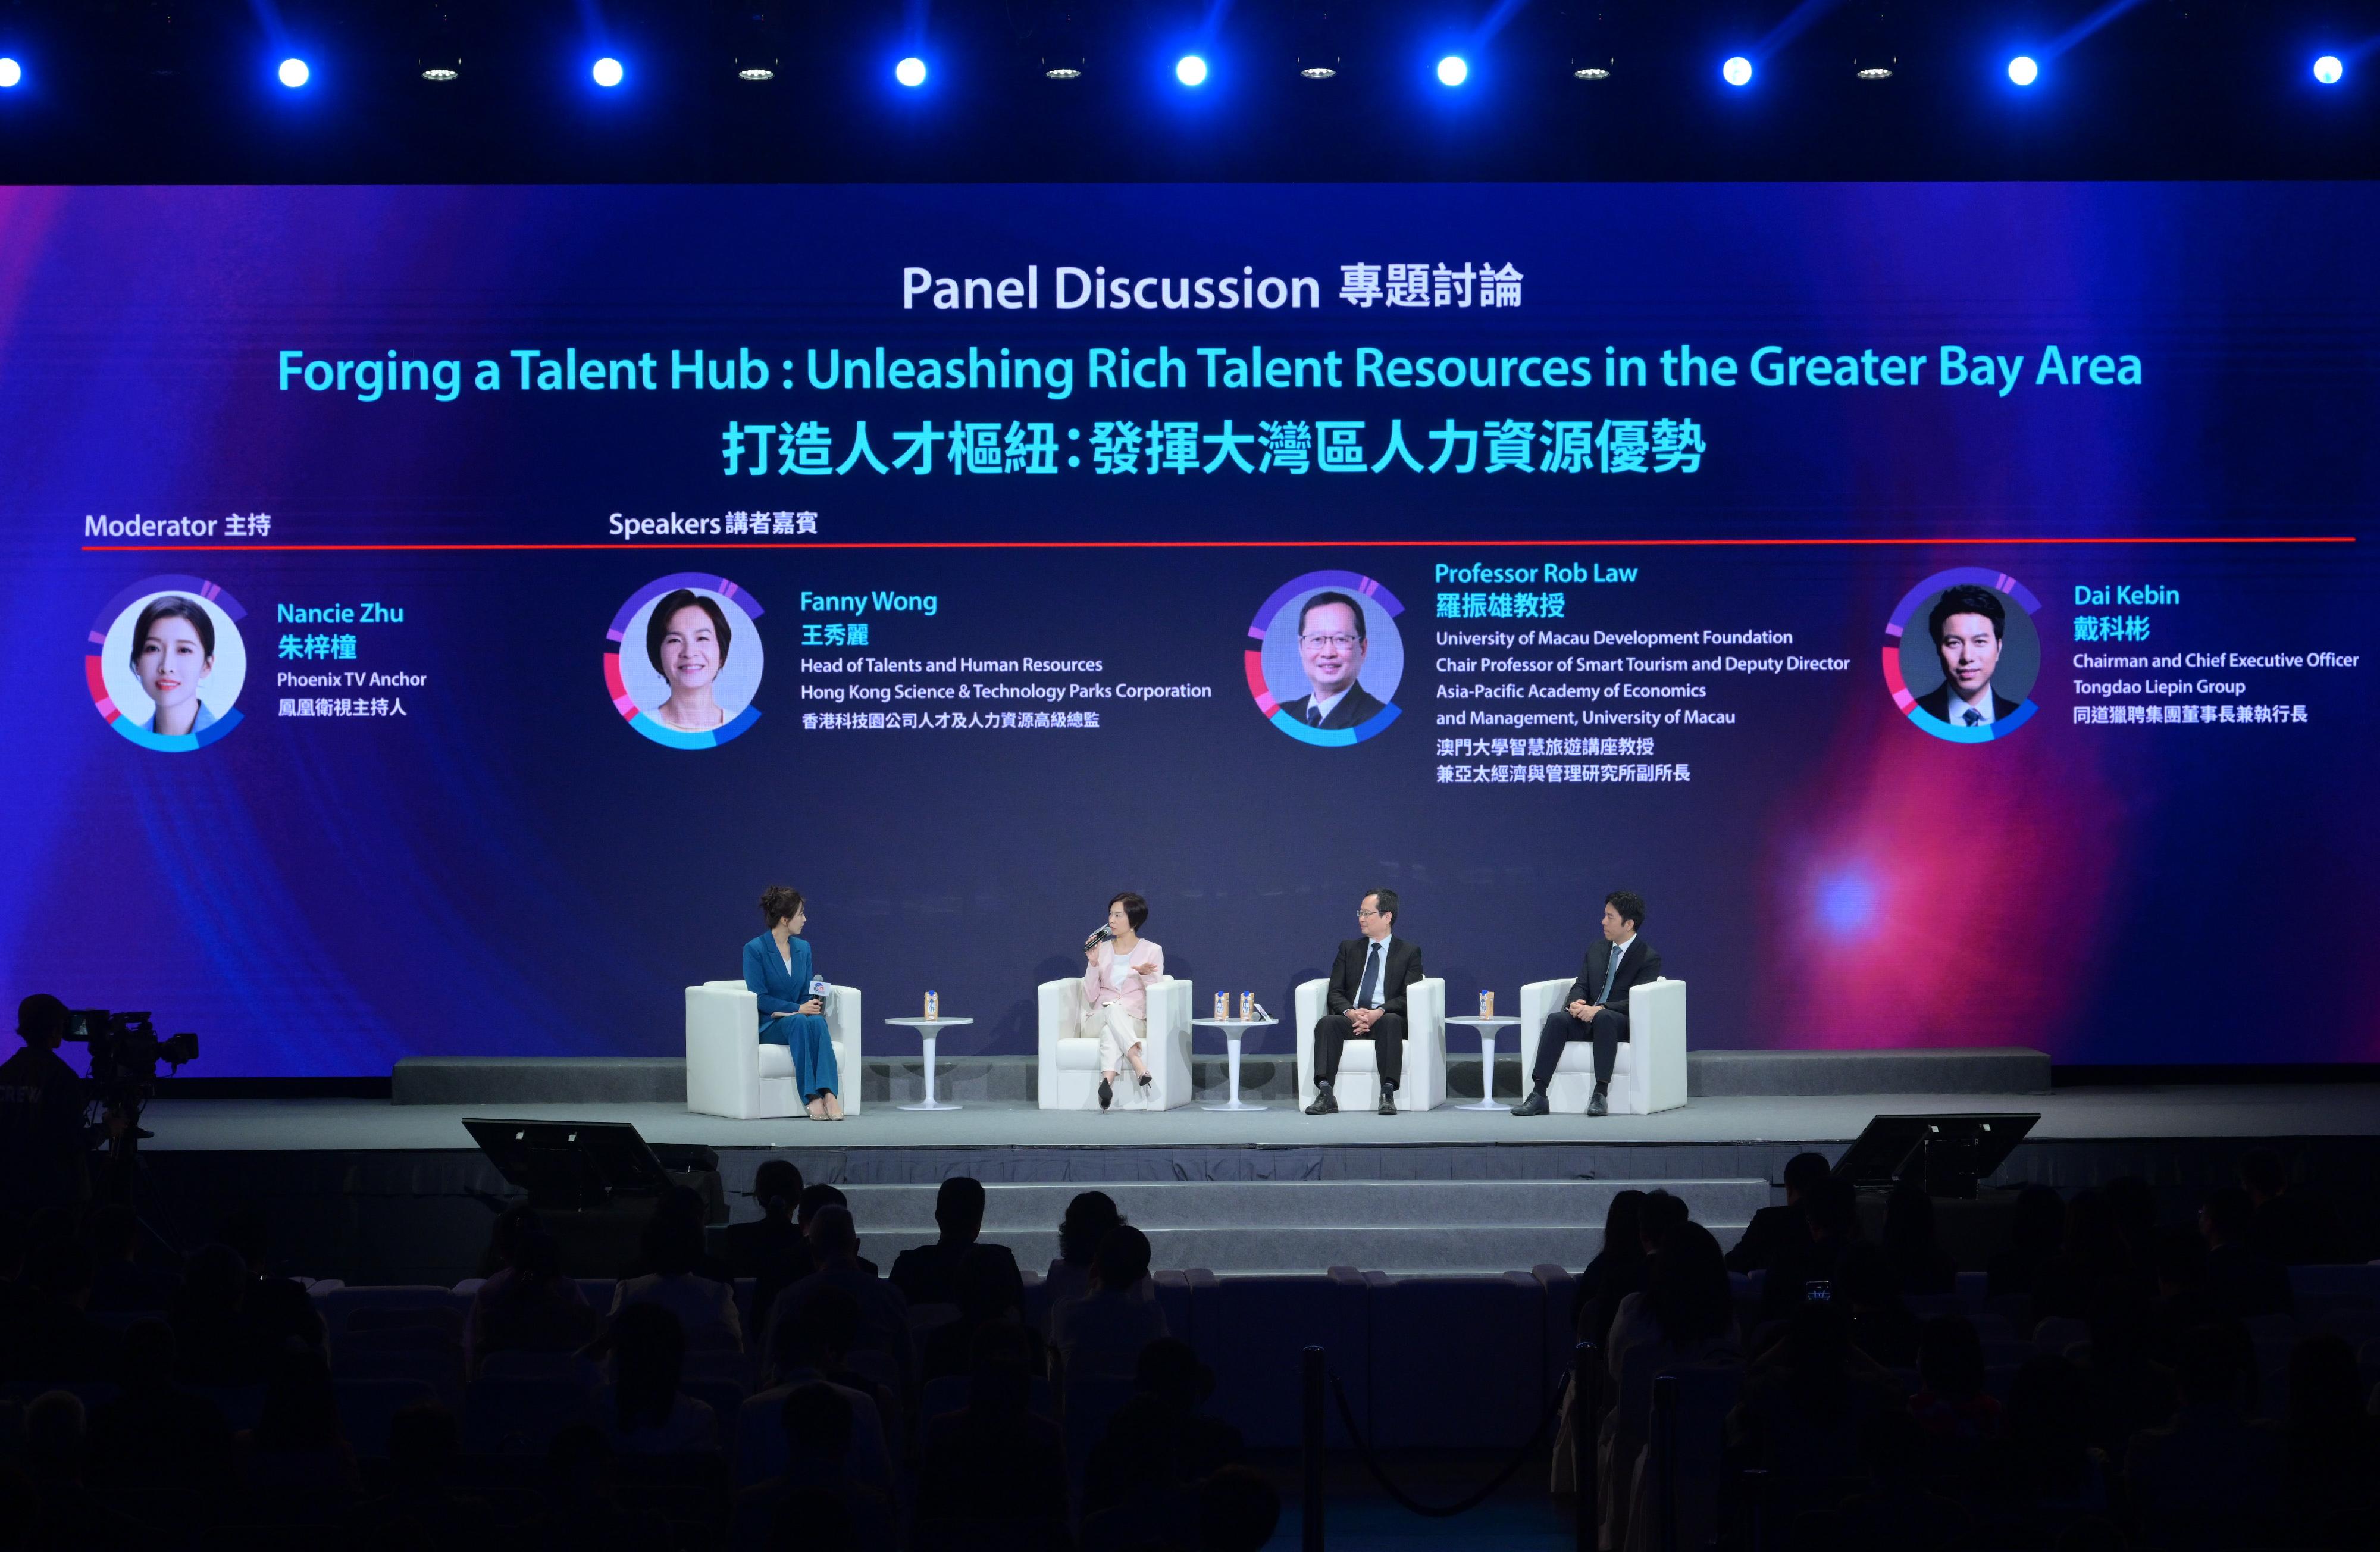 The Second Guangdong-Hong Kong-Macao Greater Bay Area (GBA) High-quality Talent Development Conference jointly organised by Guangdong, Hong Kong and Macao was held in Hong Kong today (May 8), with an aim to promote the building of a talent hub in the GBA, and strengthen talent development and tripartite co-operation. Photo shows a panel discussion at the Conference.